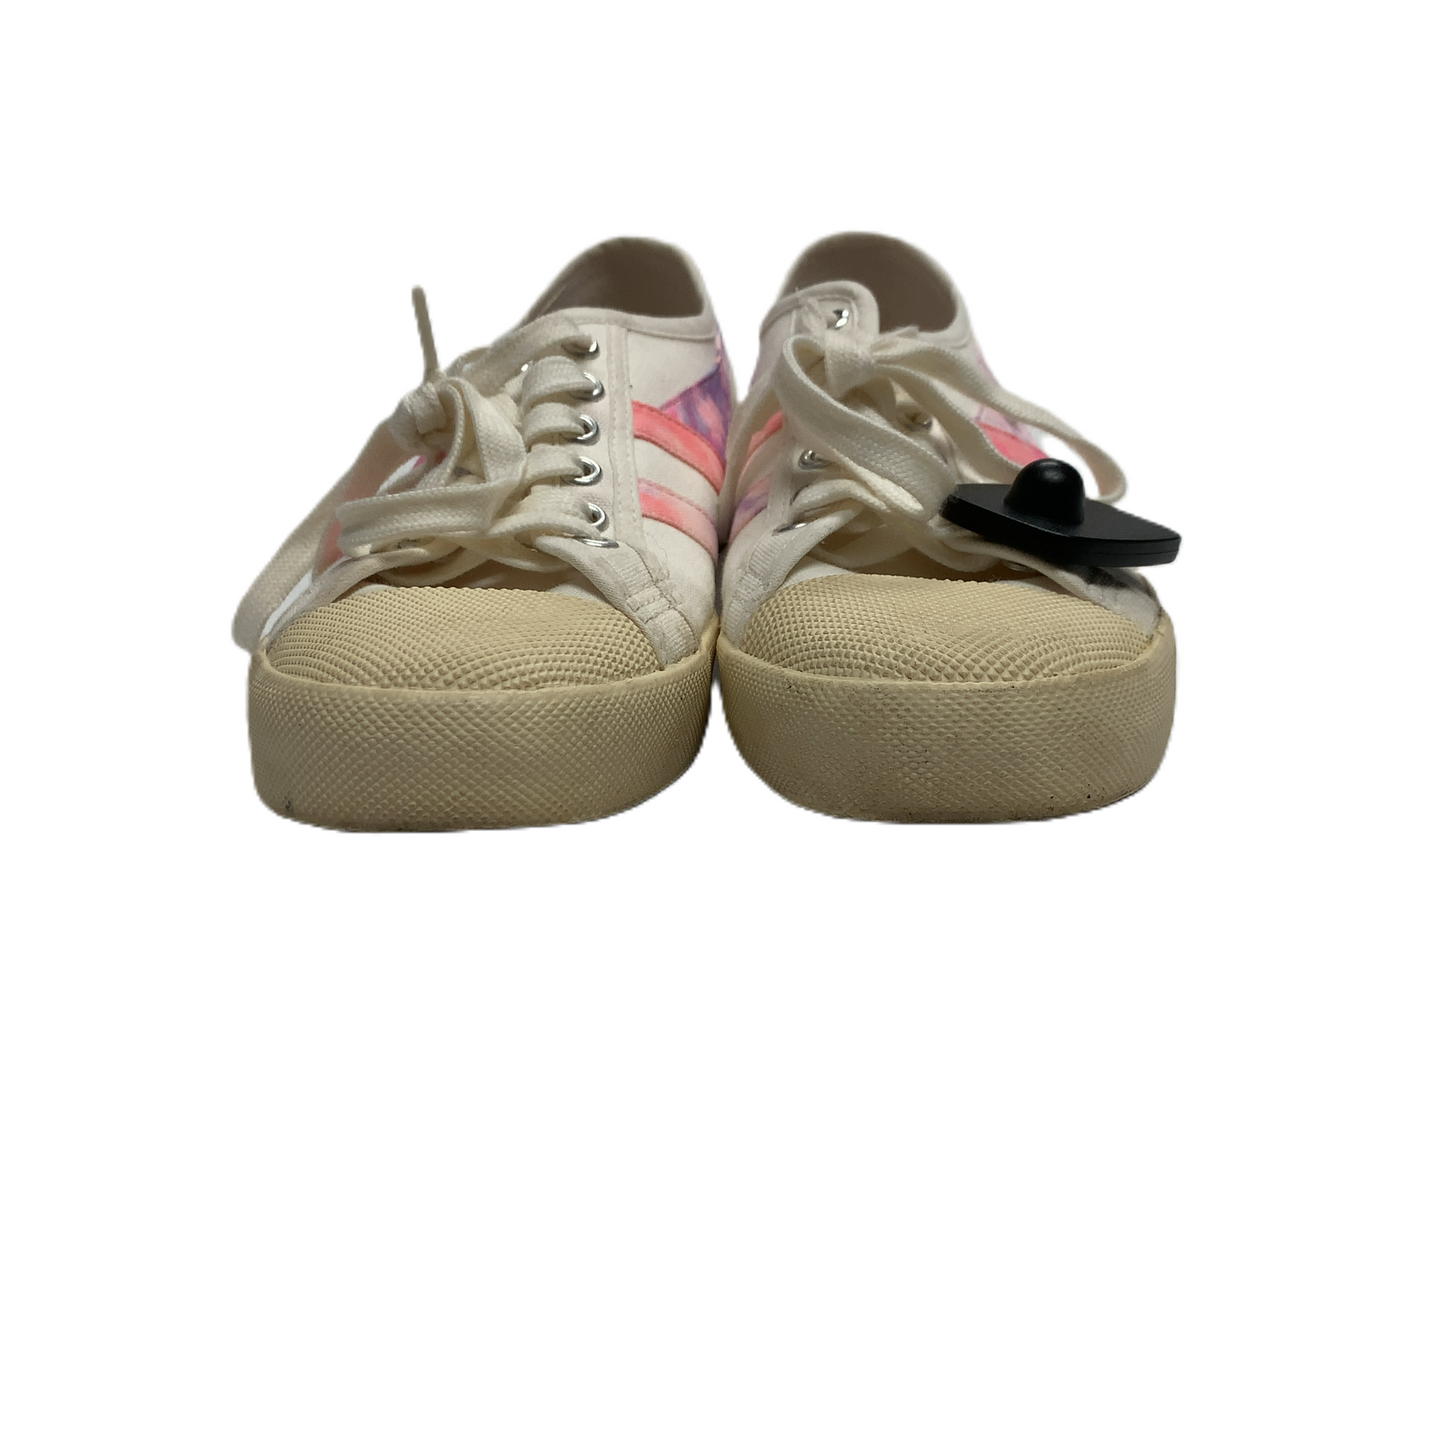 Shoes Sneakers By Gola  Size: 6